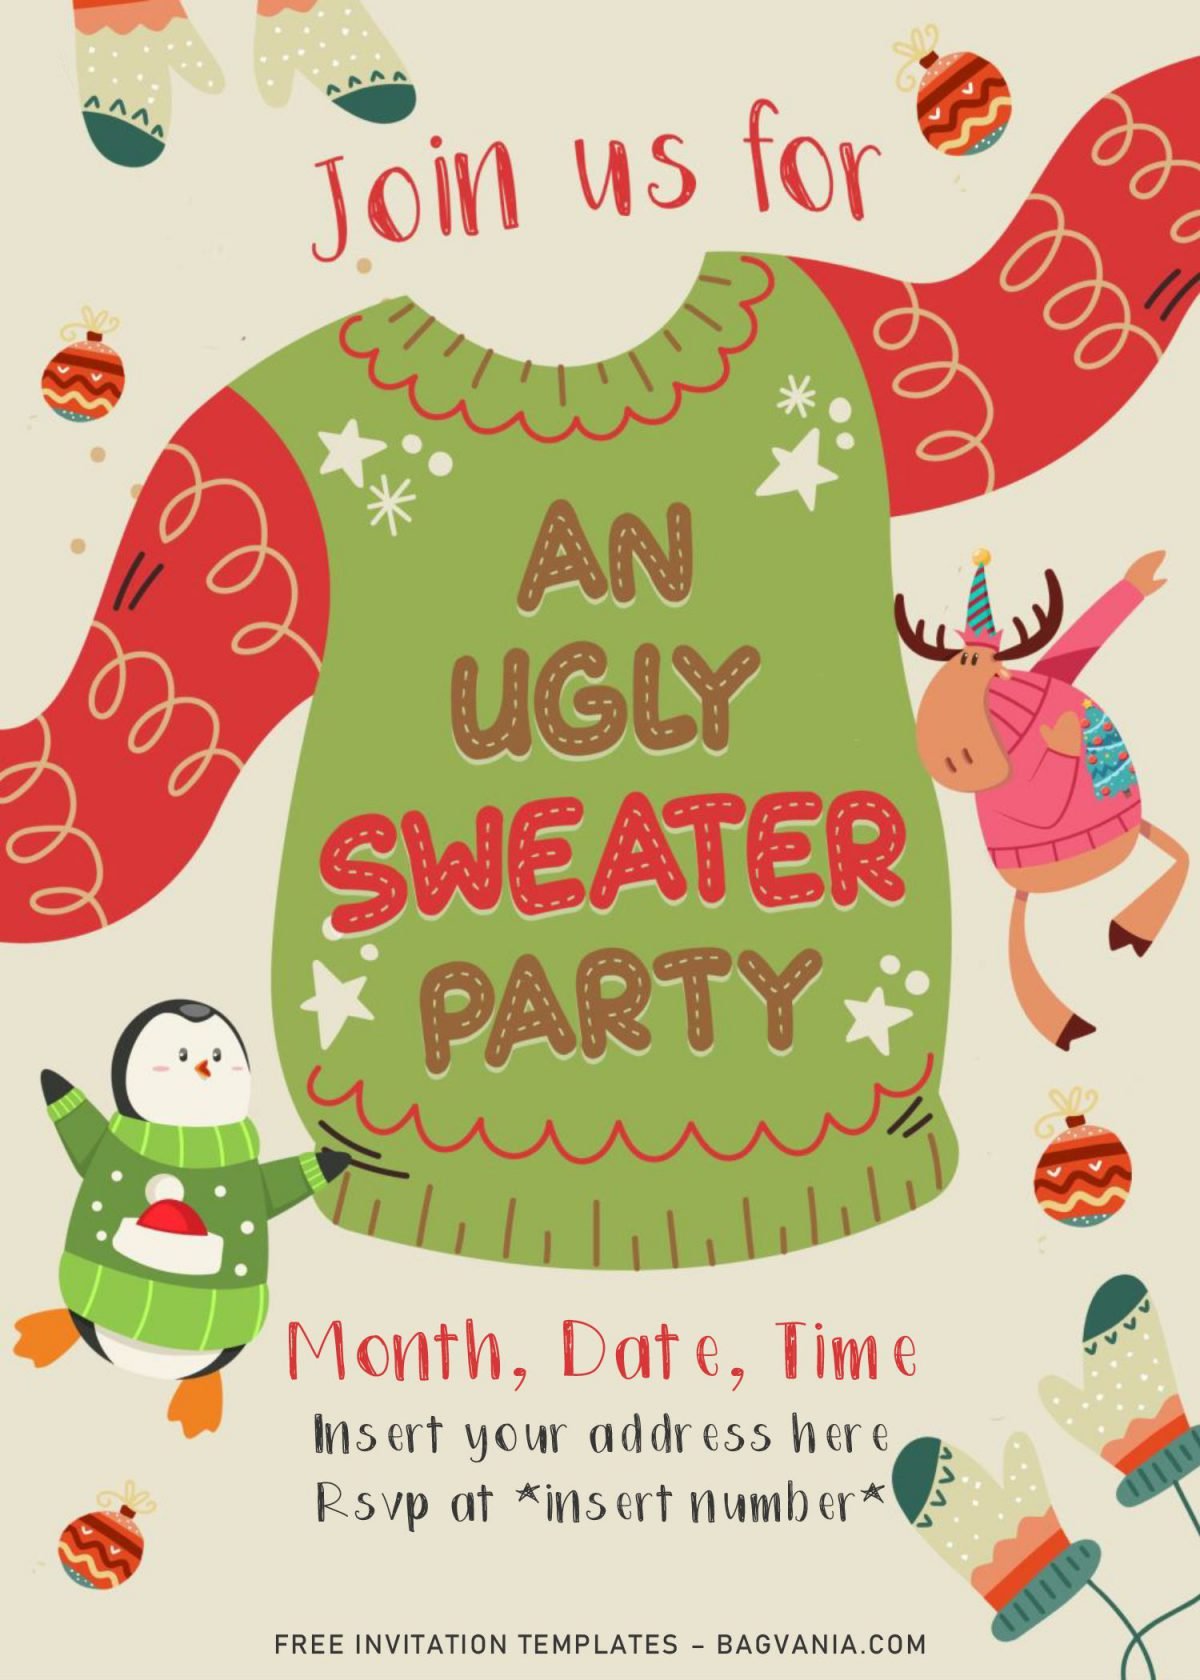 Free Winter Ugly Sweater Birthday Party Invitation Templates For Word and has Cute Penguin is wearing sweater